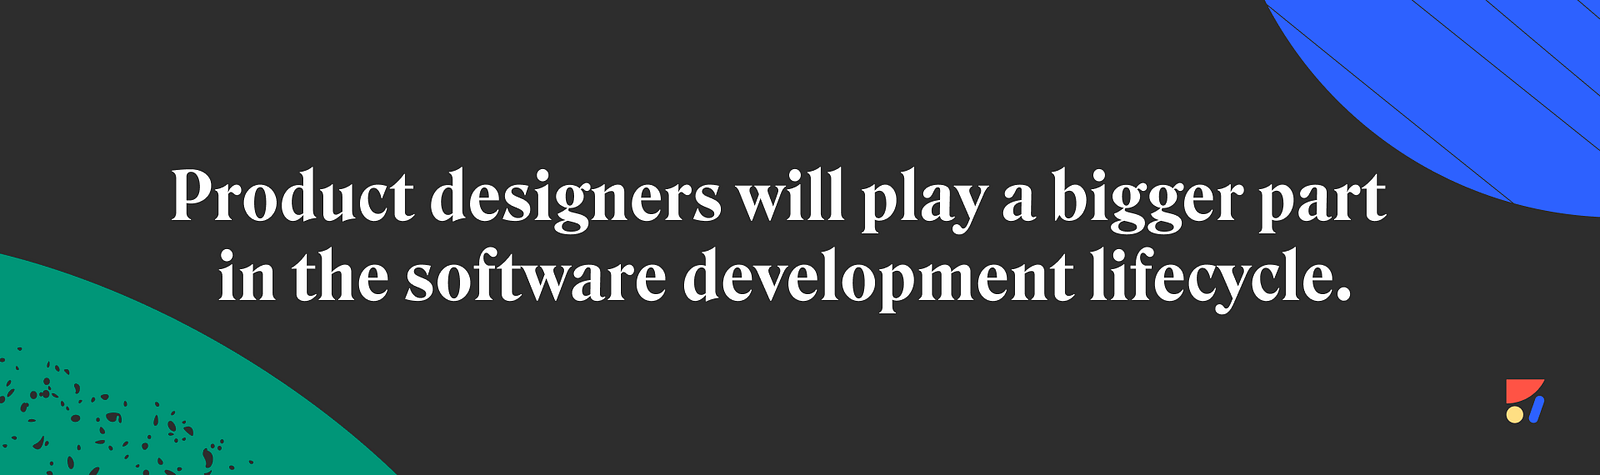 Product designers will play a bigger part in software development lifecycle